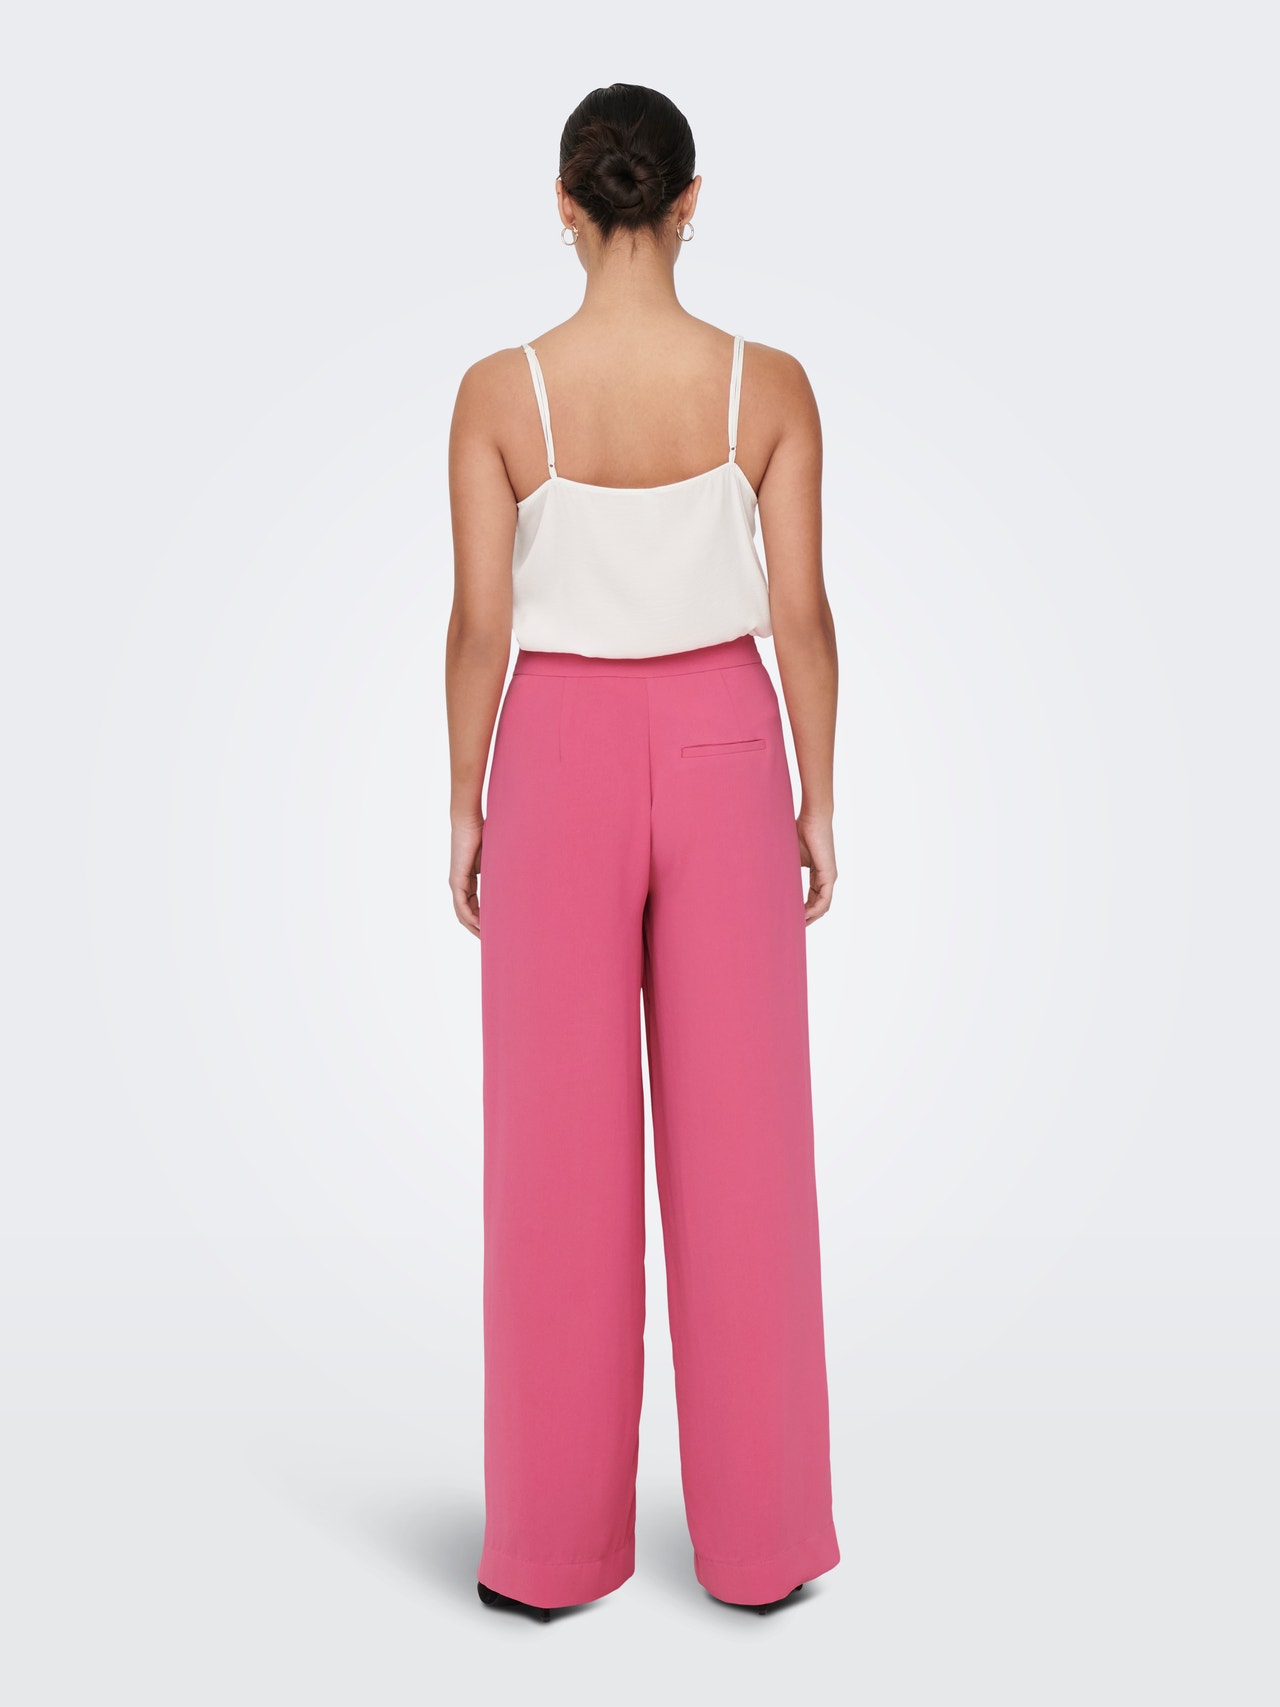 ONLY High waist classic pants -Shocking Pink - 15279301